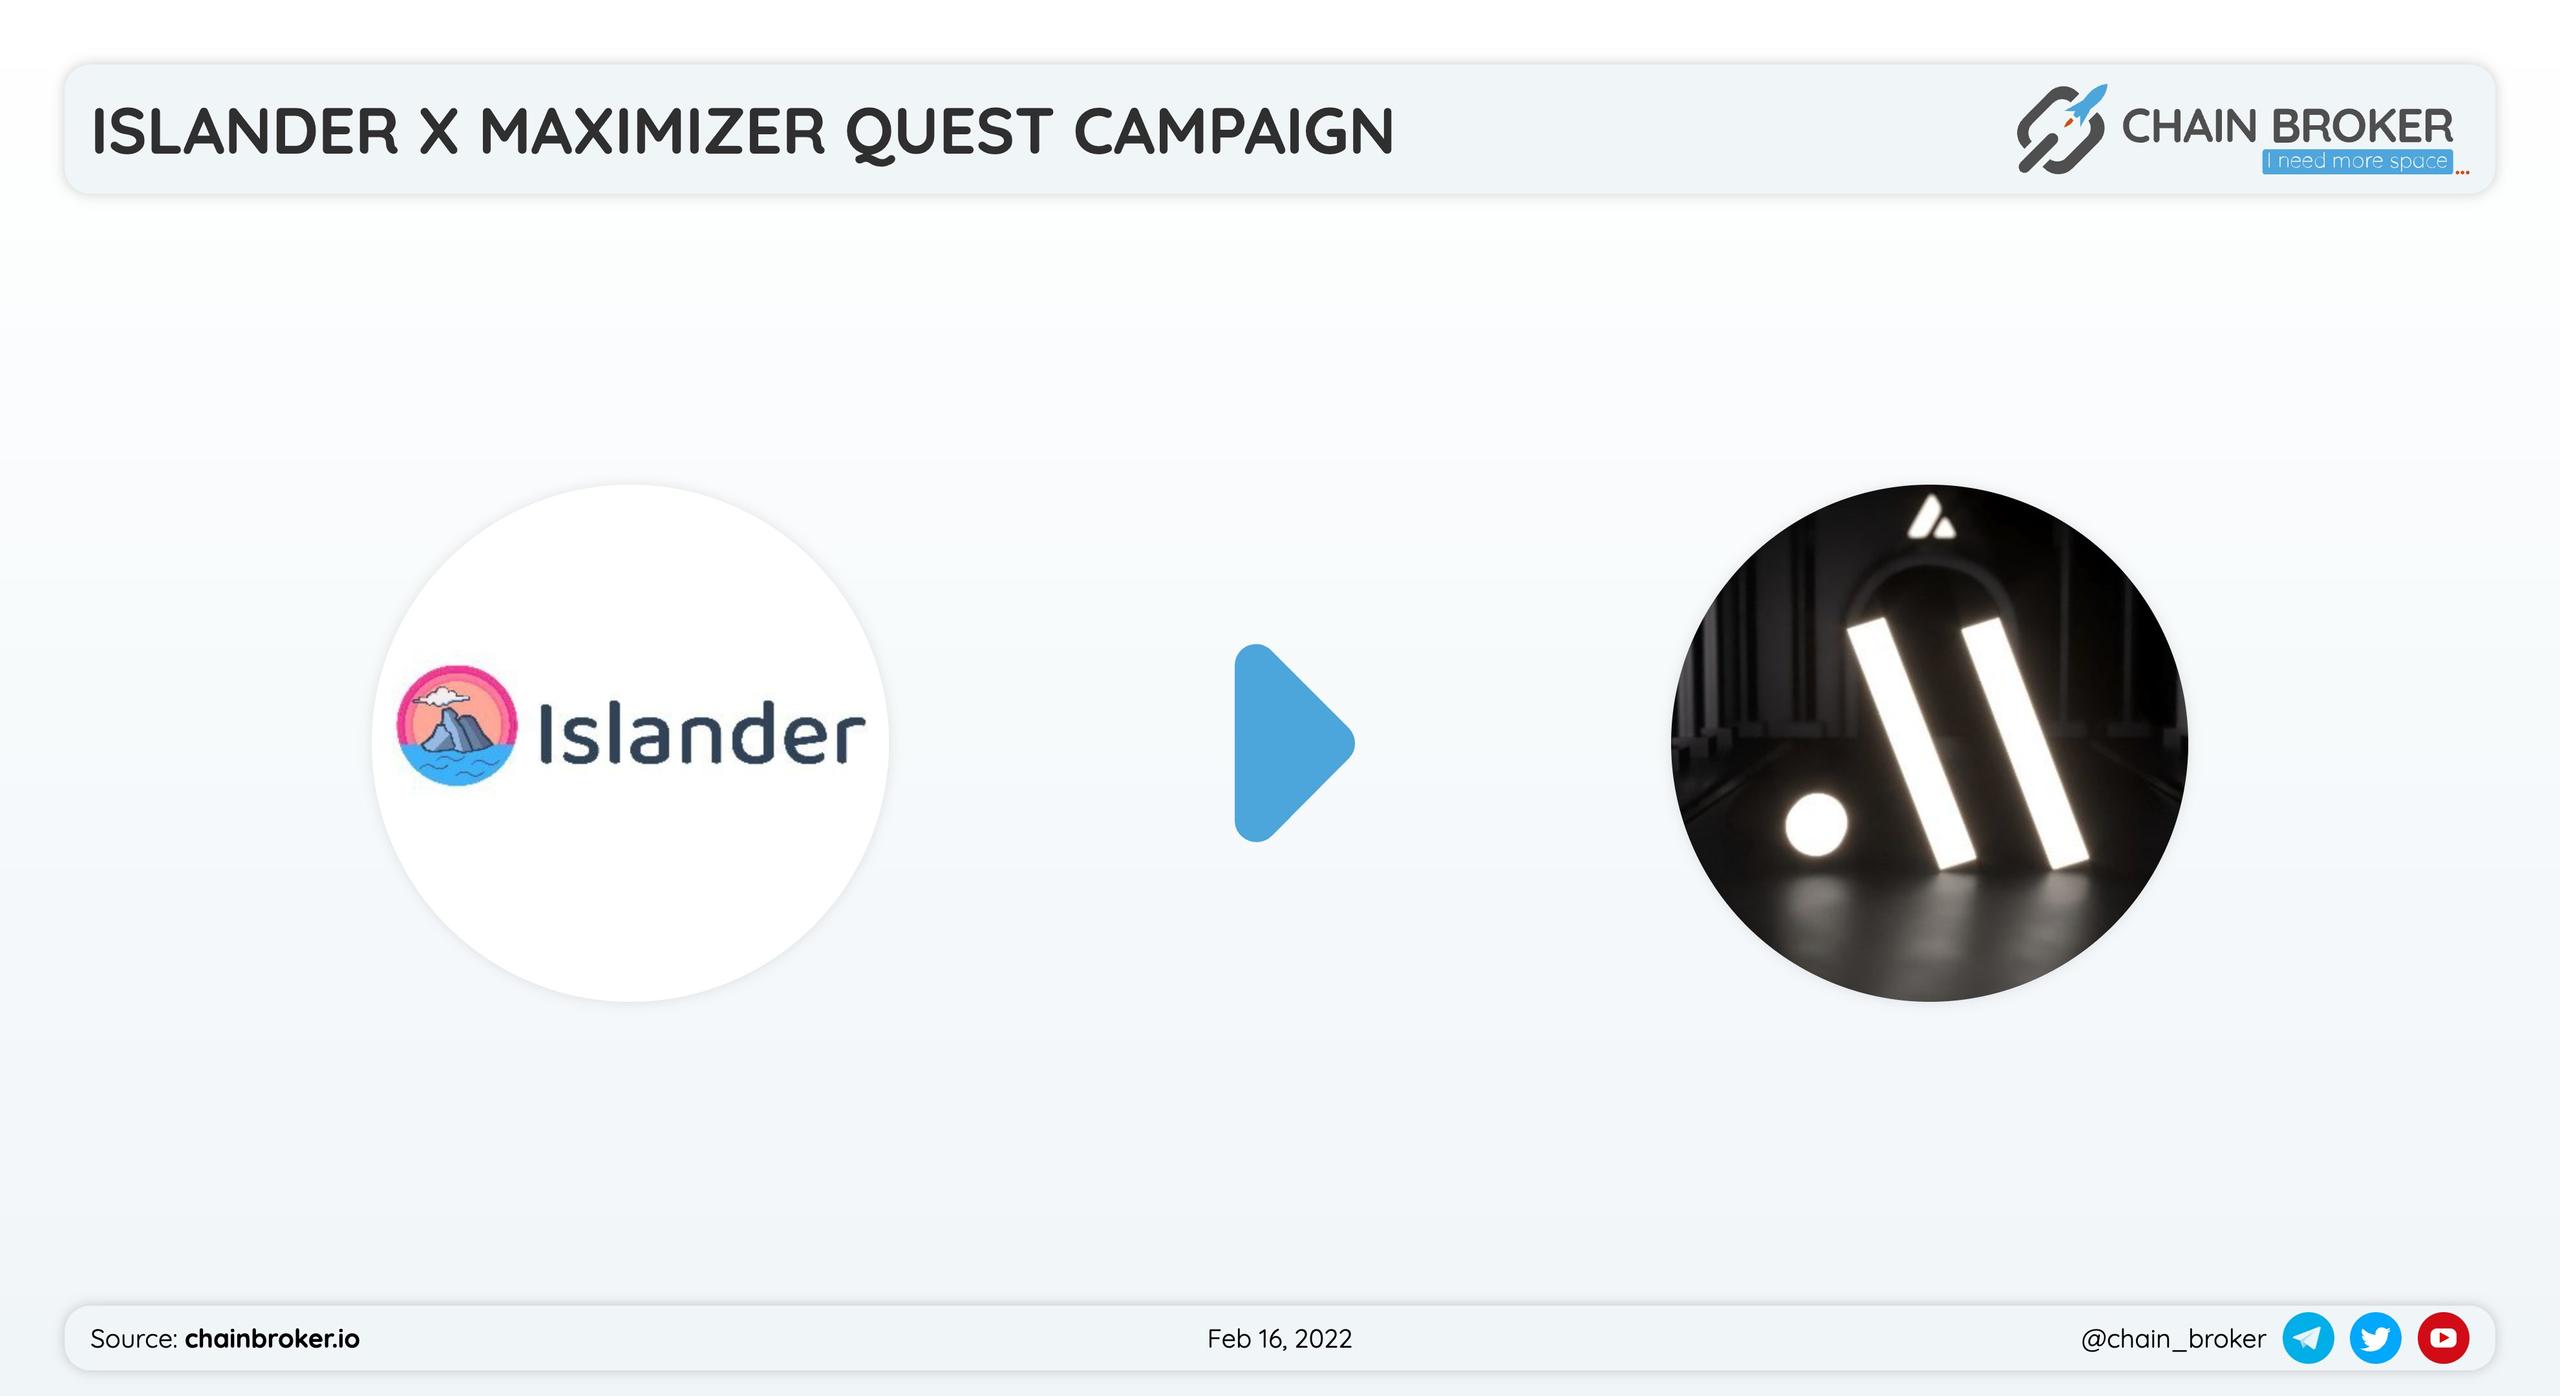 Islander has partnered with Maximizer for a quest campaign